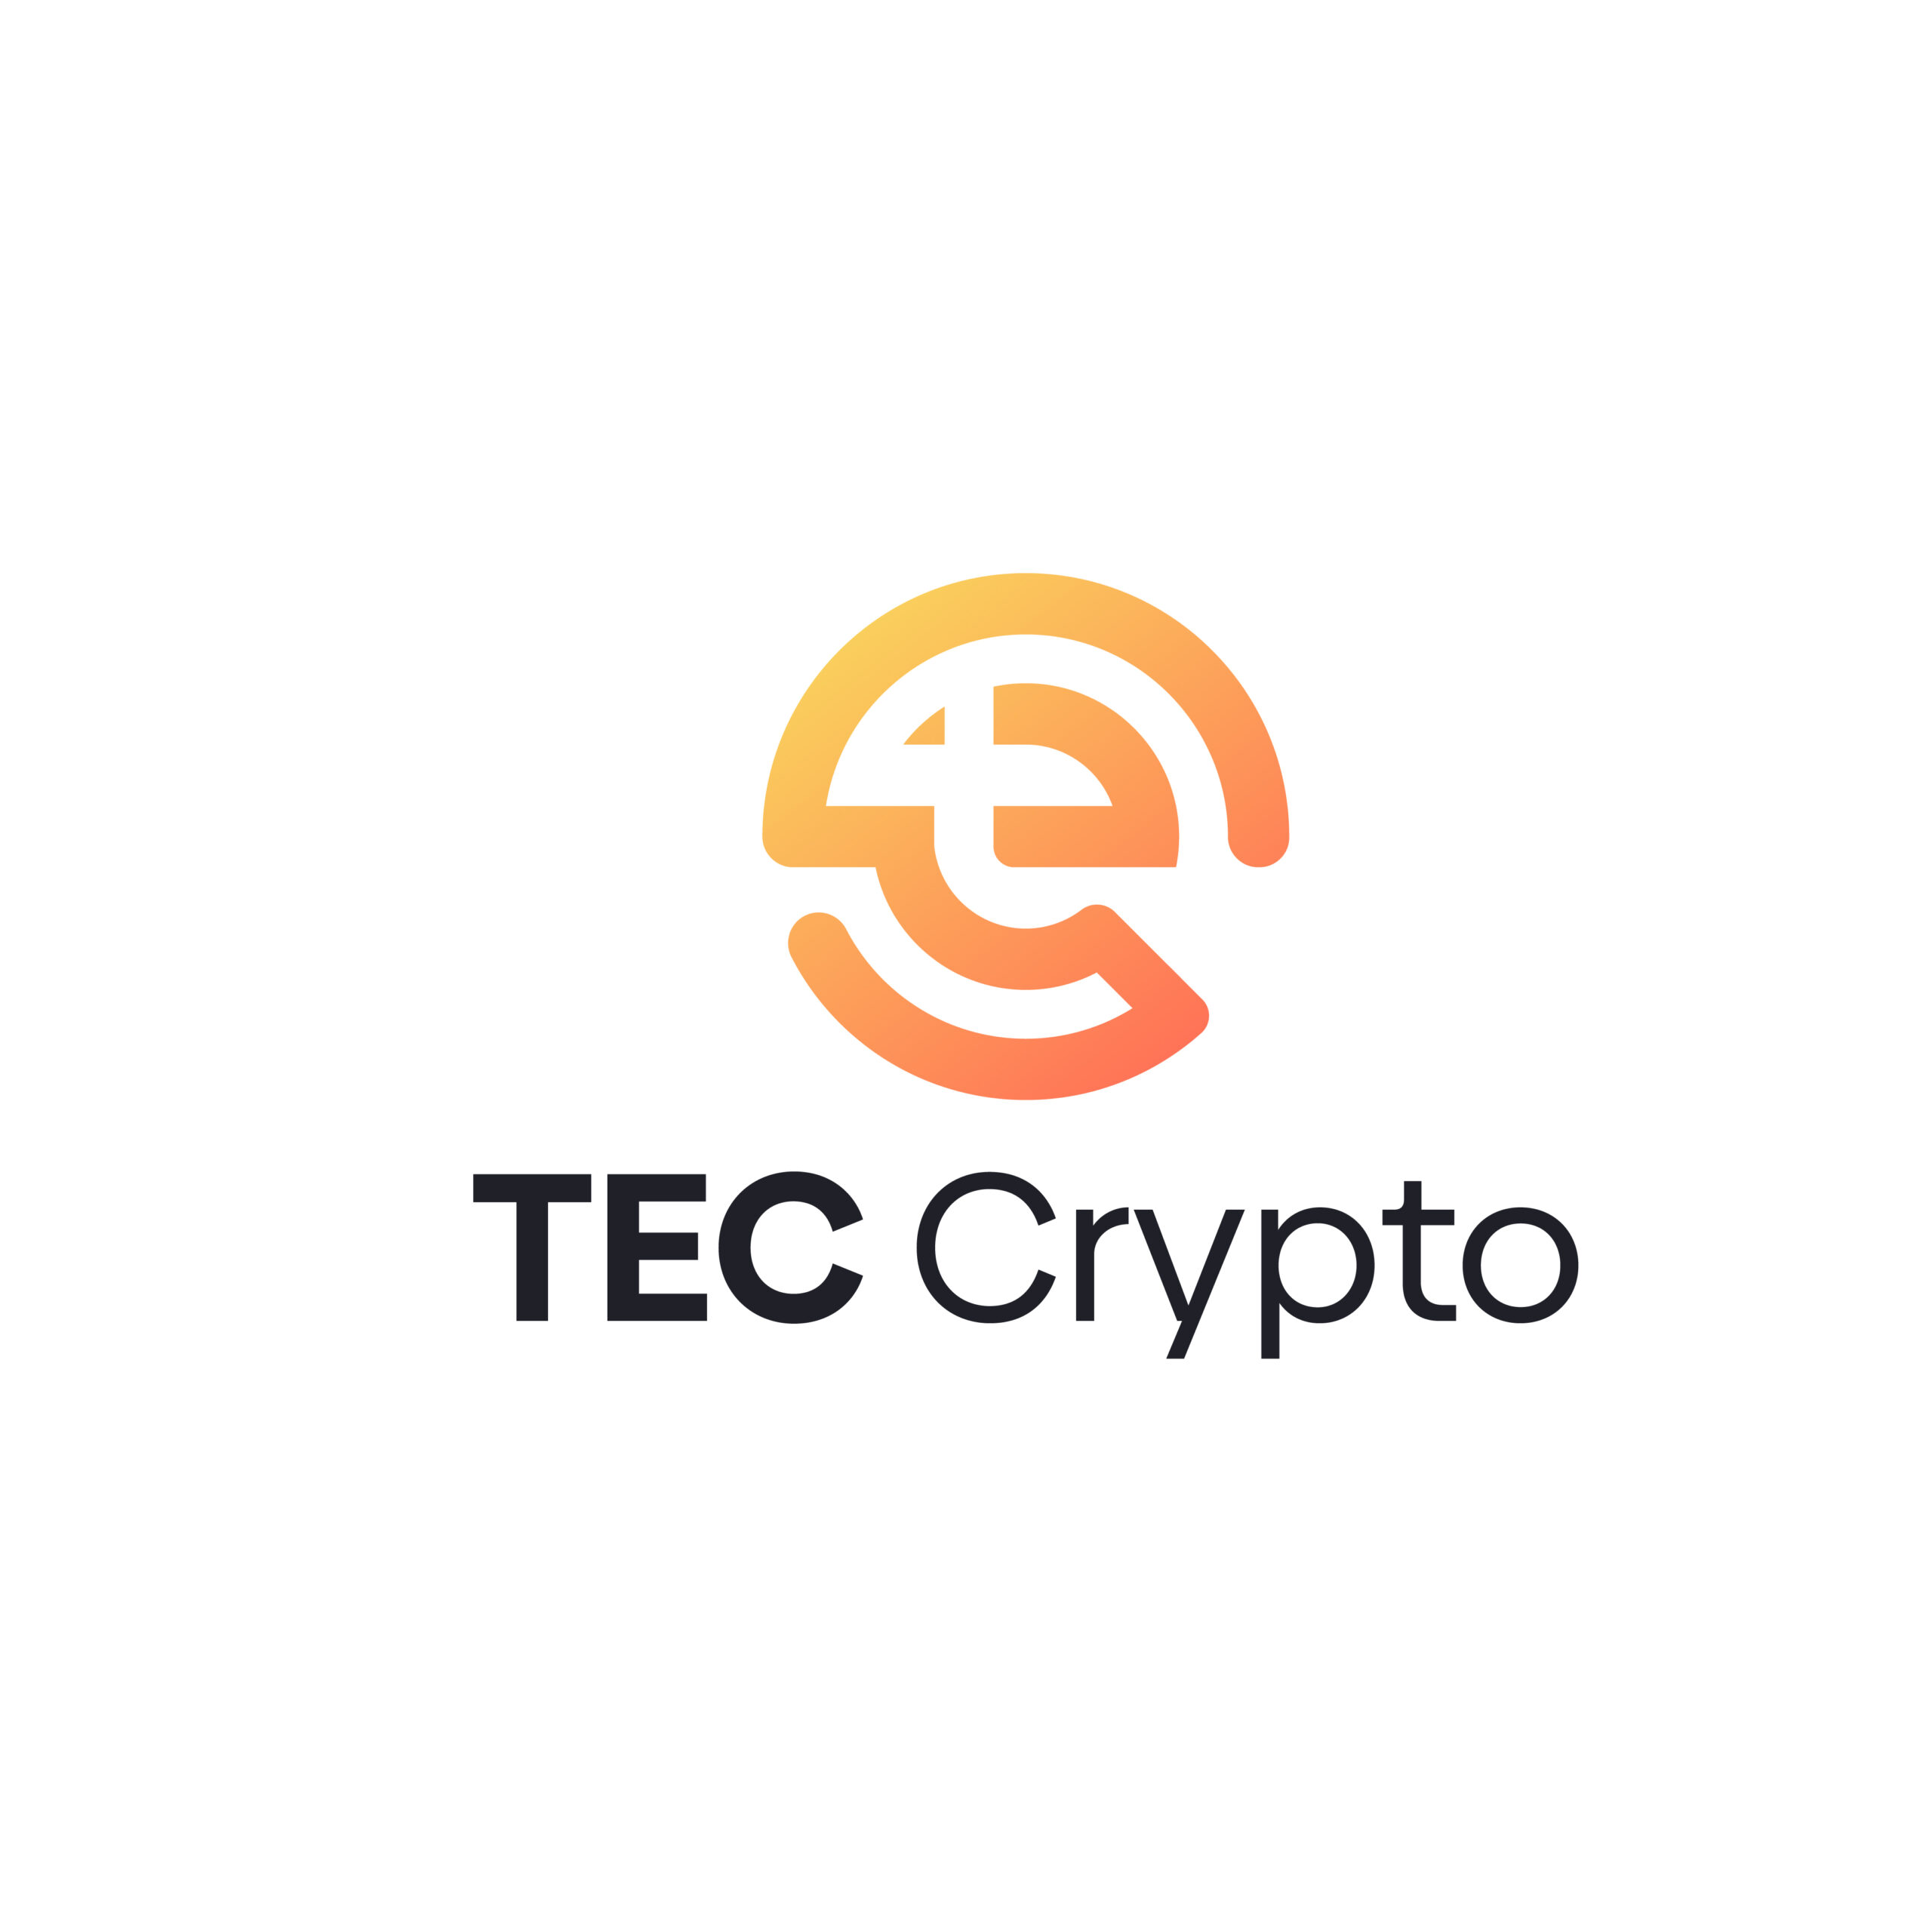 , Taking Cloud Mining to New Heights: TecCrypto Uses New Technology